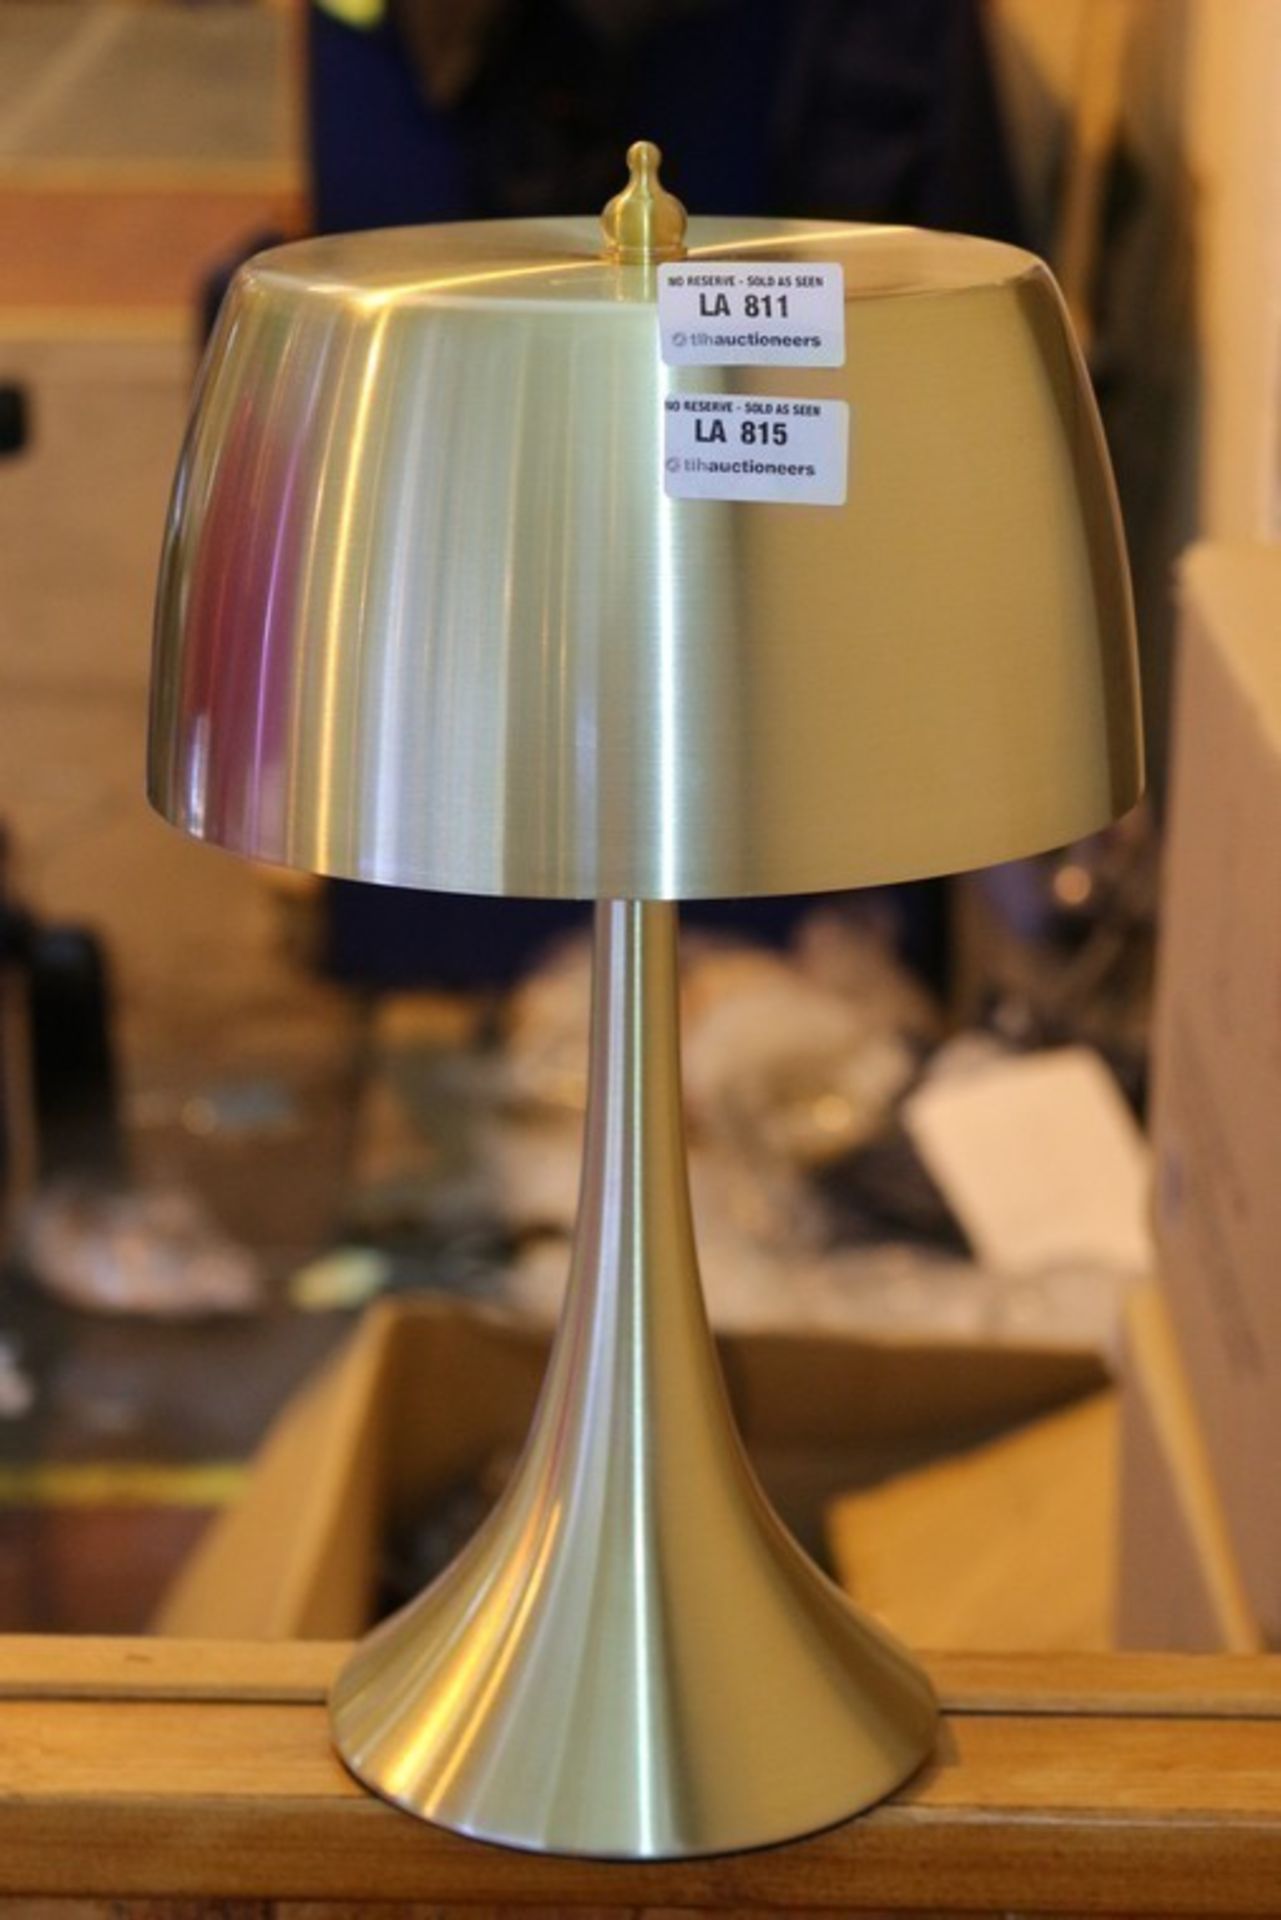 1 x BELLE STYLE TABLE LAMP IN GOLD (12-GS) *PLEASE NOTE THAT THE BID PRICE IS MULTIPLIED BY THE